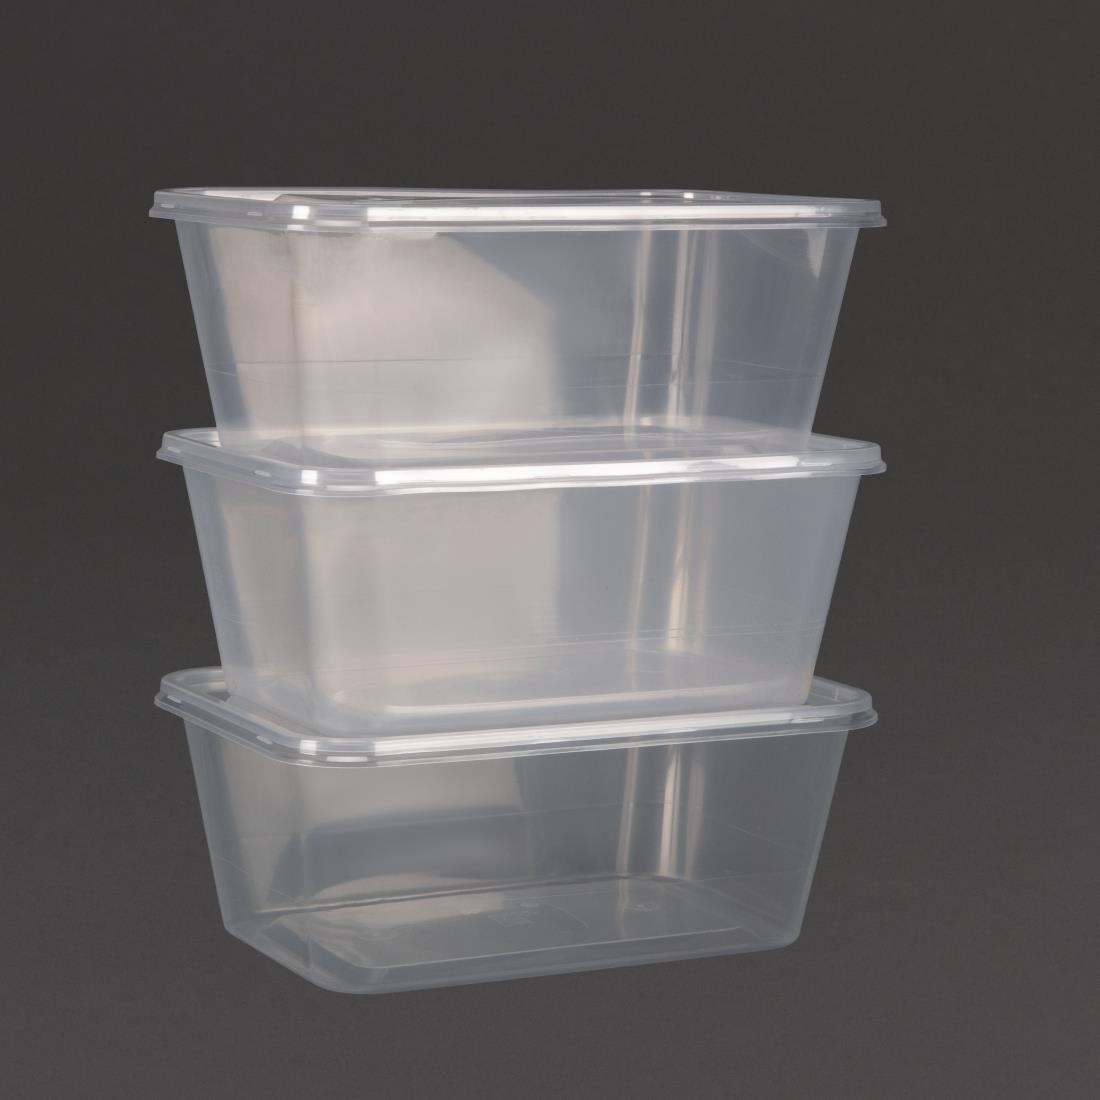 Fiesta Recyclable Plastic Microwavable Containers with Lid Large 1000ml (Pack of 250) - DM183  - 3